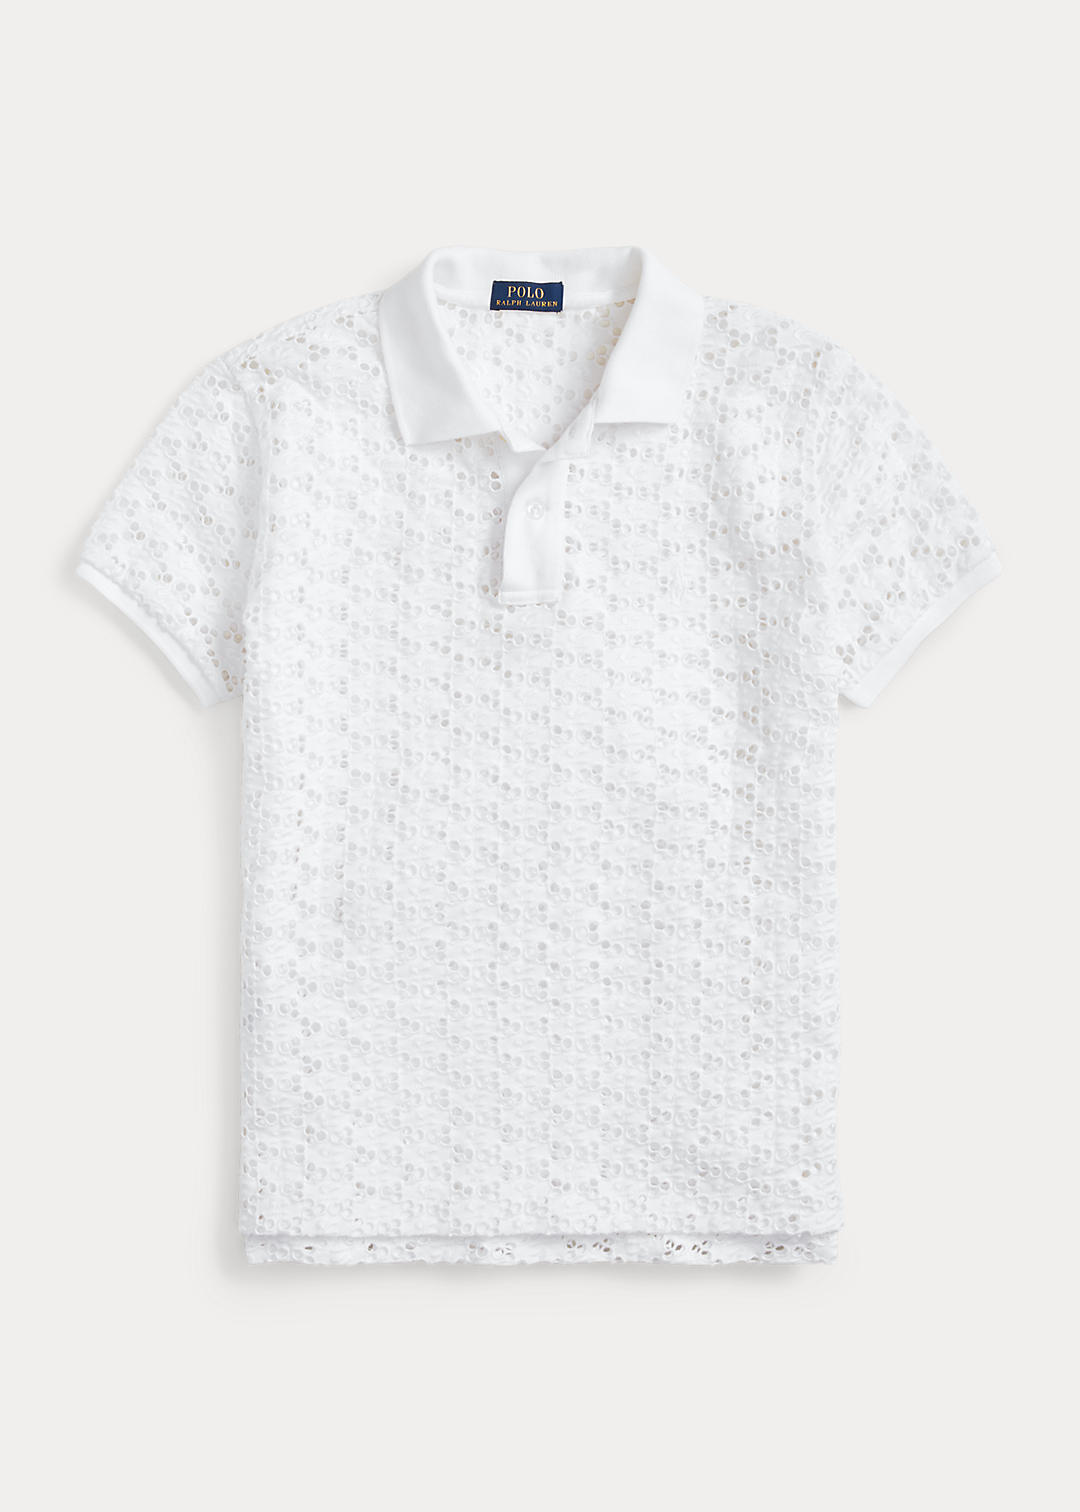 Classic Fit Cotton Eyelet Polo Shirt